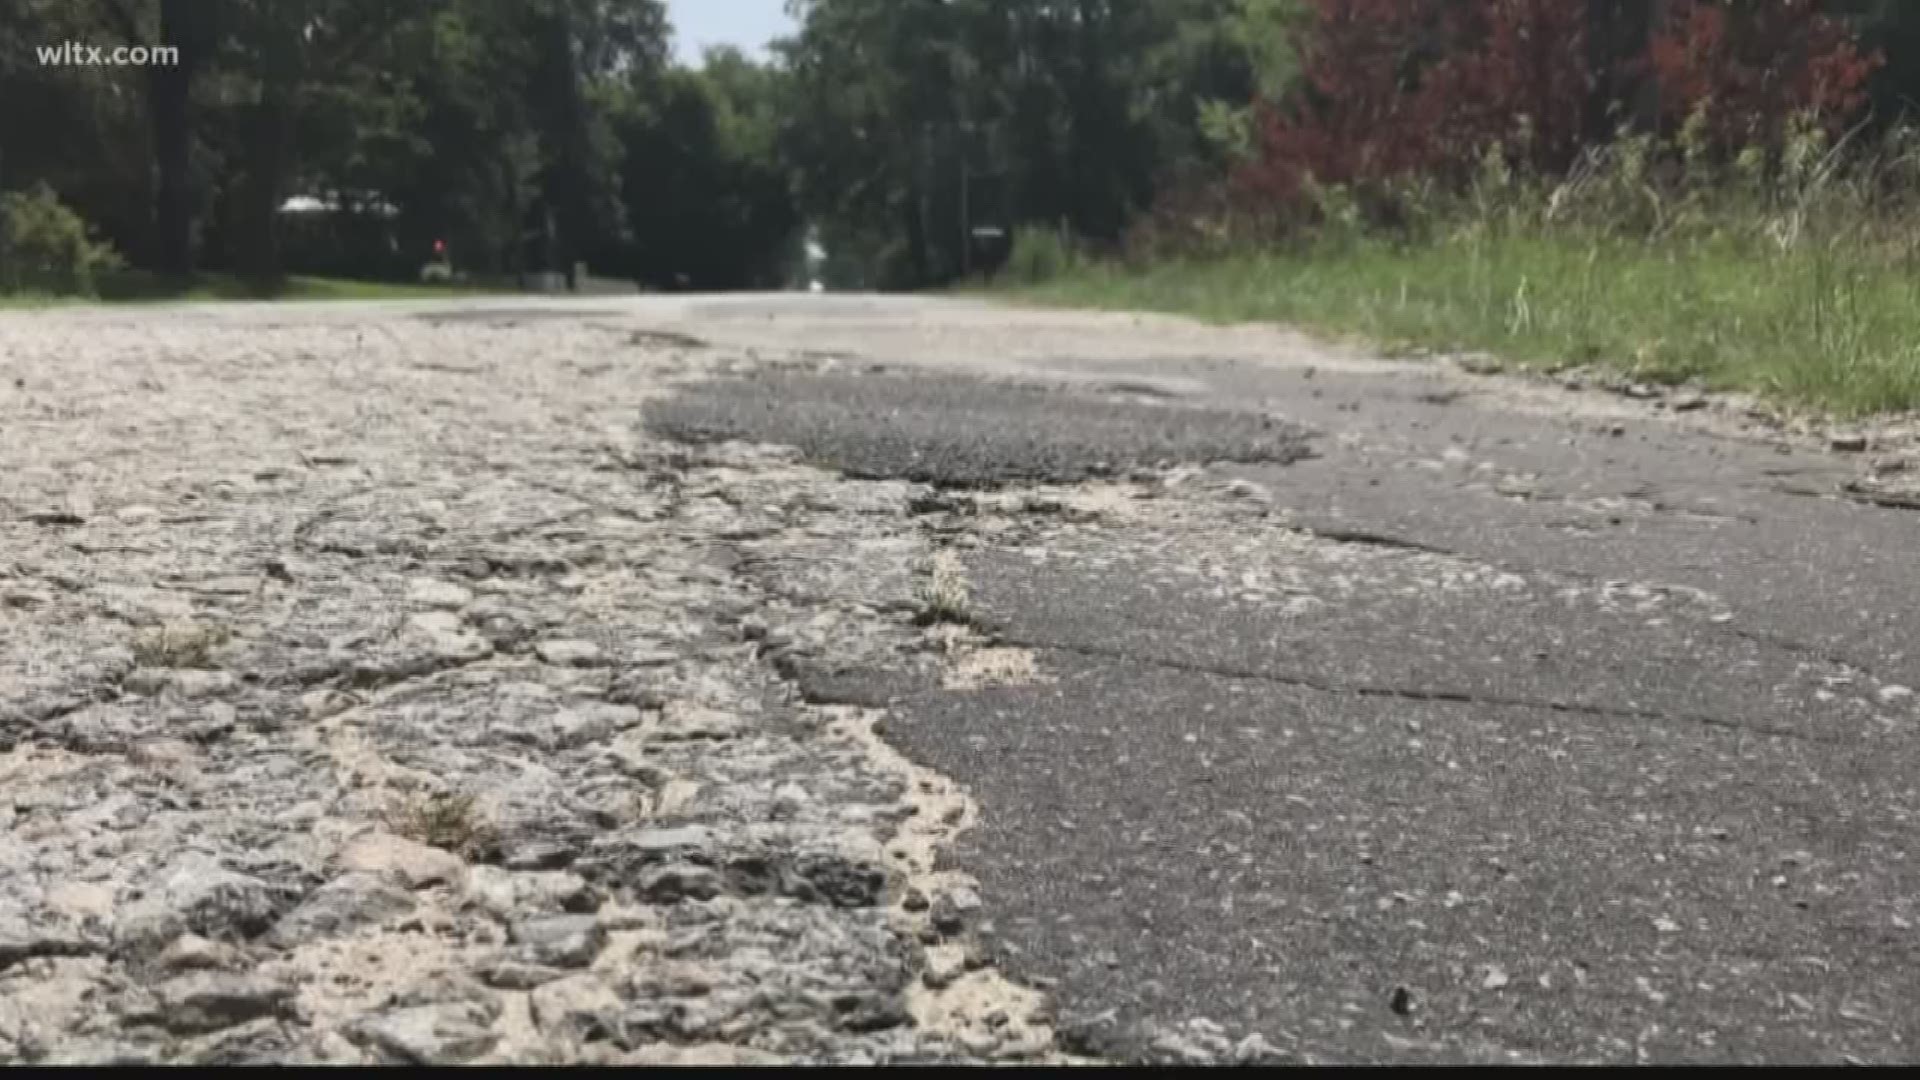 Folks in Swansea are looking to see what roads are on the list to be repaved